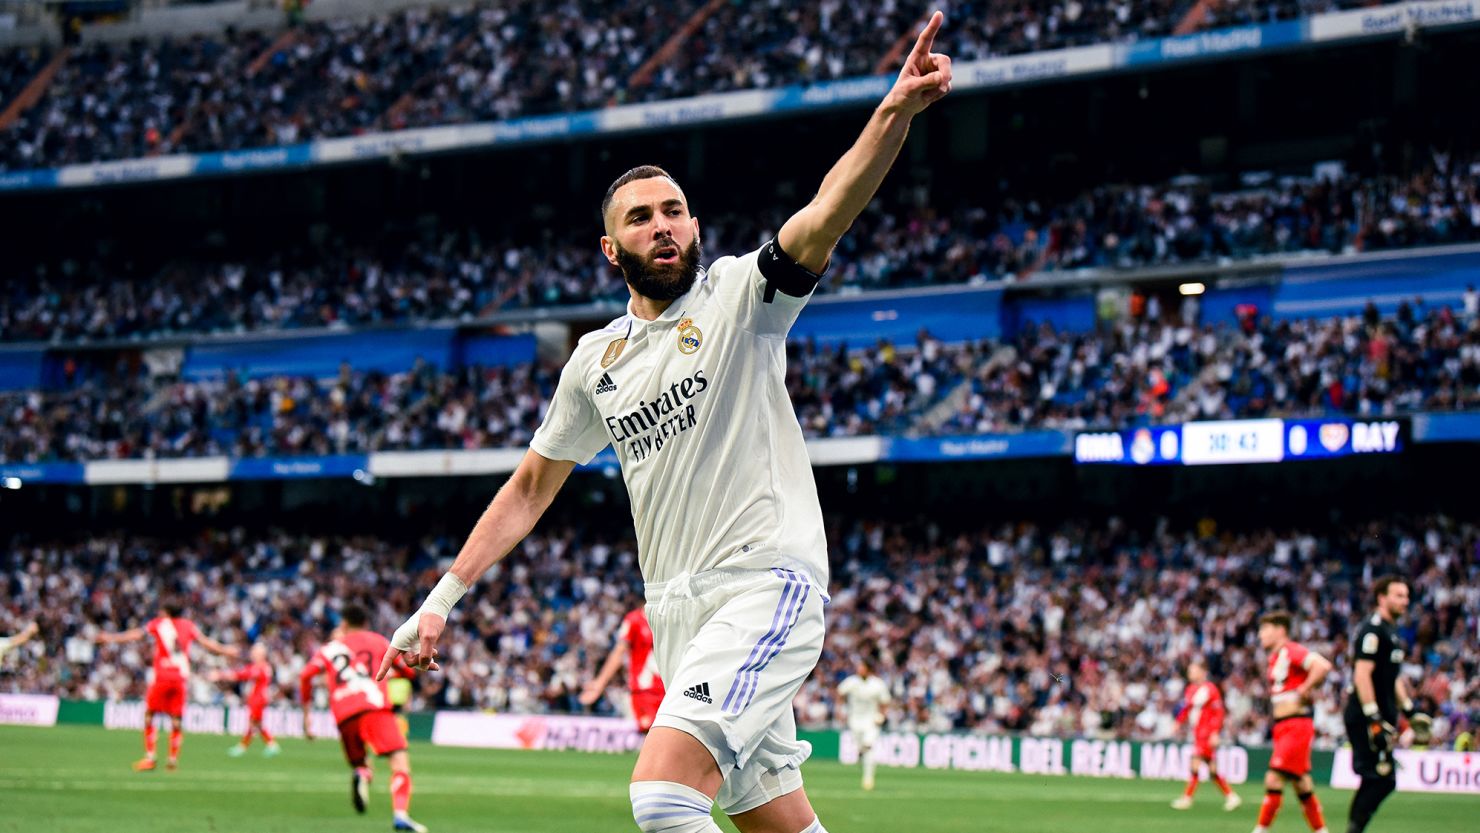 Karim Benzema celebrates scoring for Real Madrid against Rayo Vallecano on May 24 in Madrid, Spain.